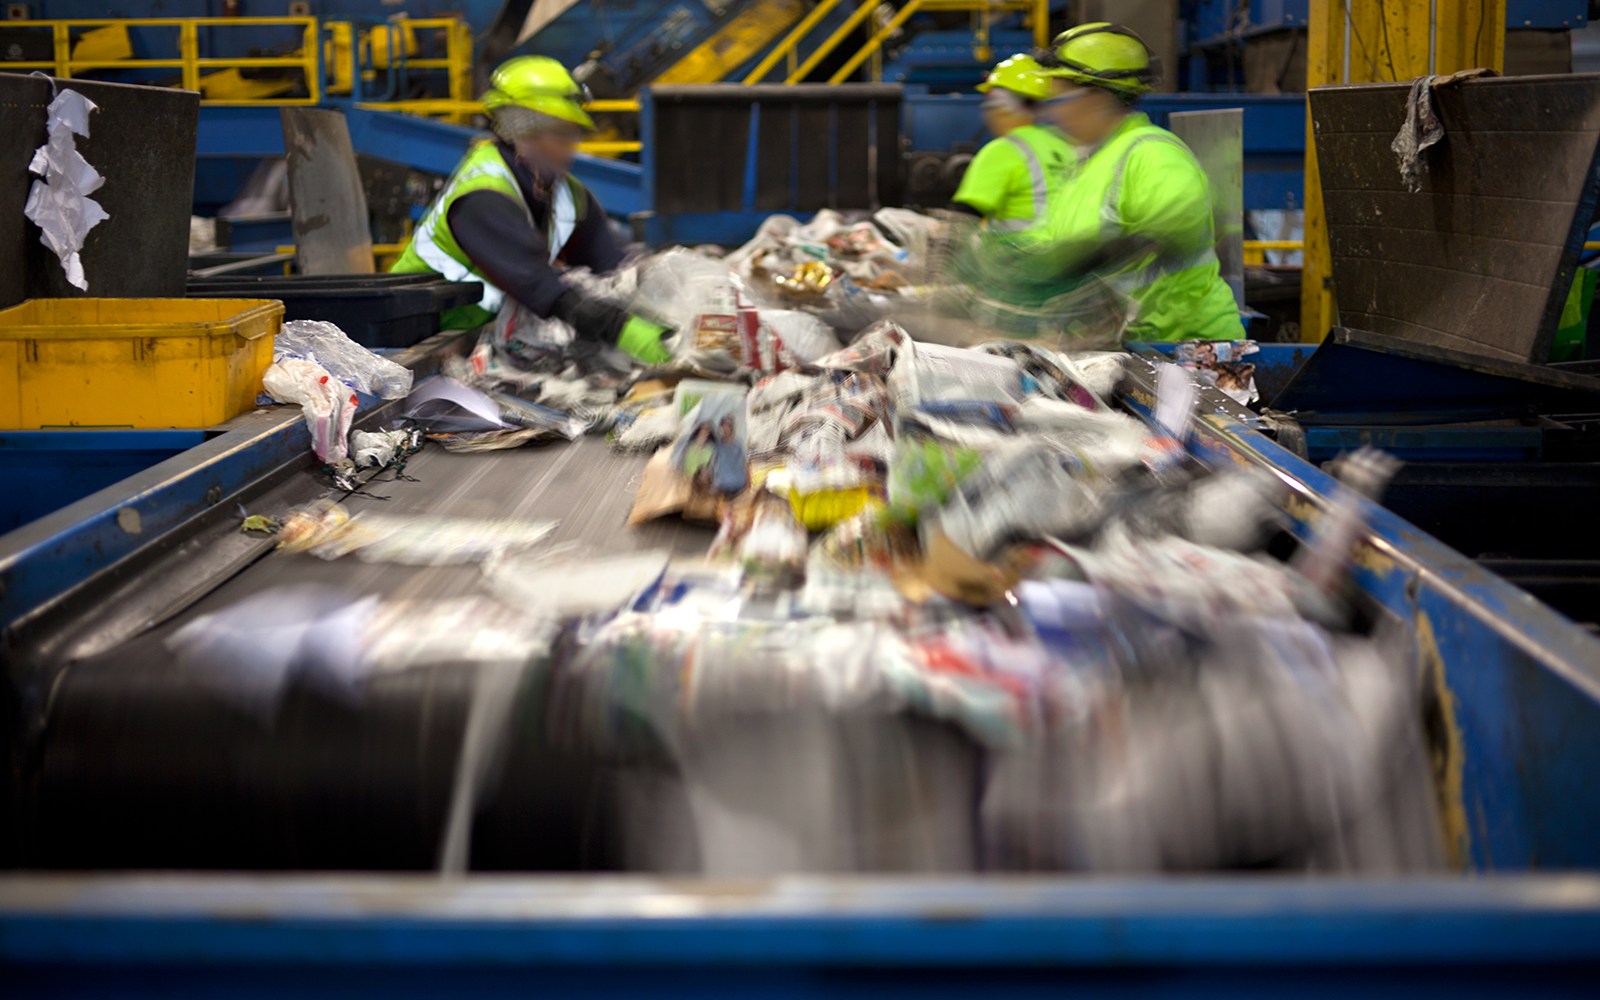 recycling workers sort materials on a conveyer belt.